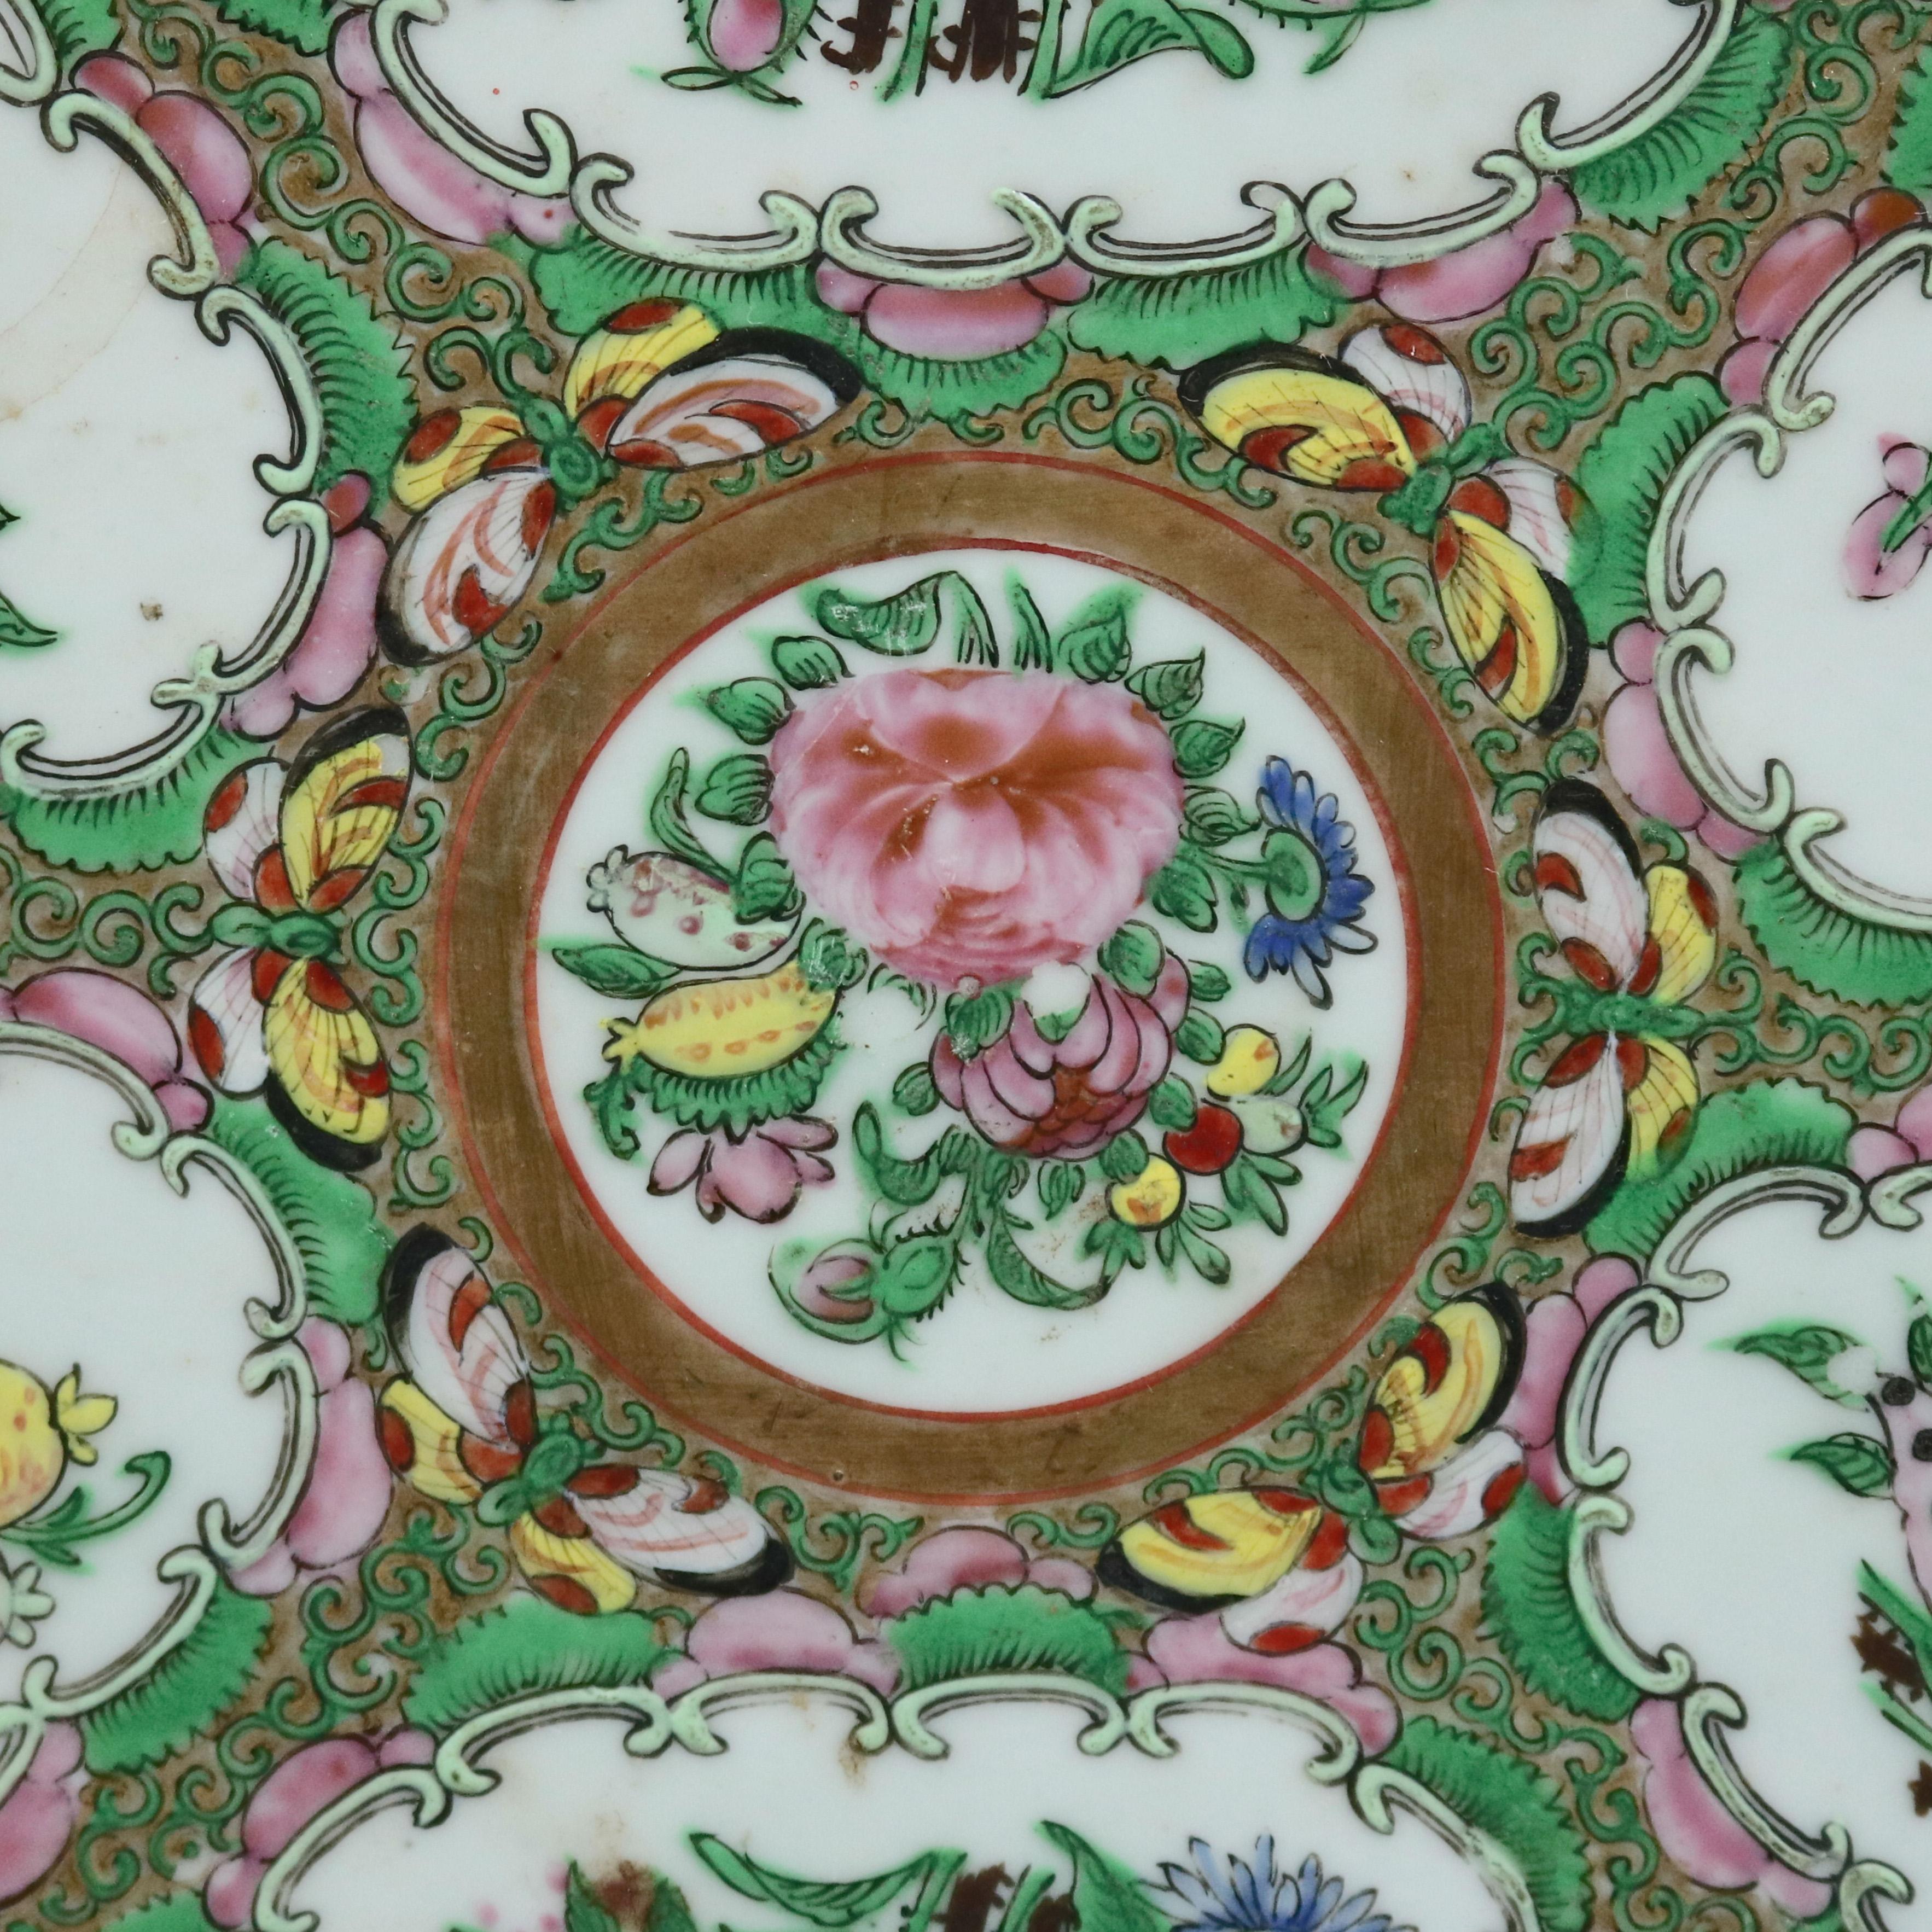 An antique Chinese Rose Medallion enameled porcelain platter offers hand painted panels of garden scenes including flowers and birds (pheasants), gilt highlights throughout, circa 1890

***DELIVERY NOTICE – Due to COVID-19 we are employing